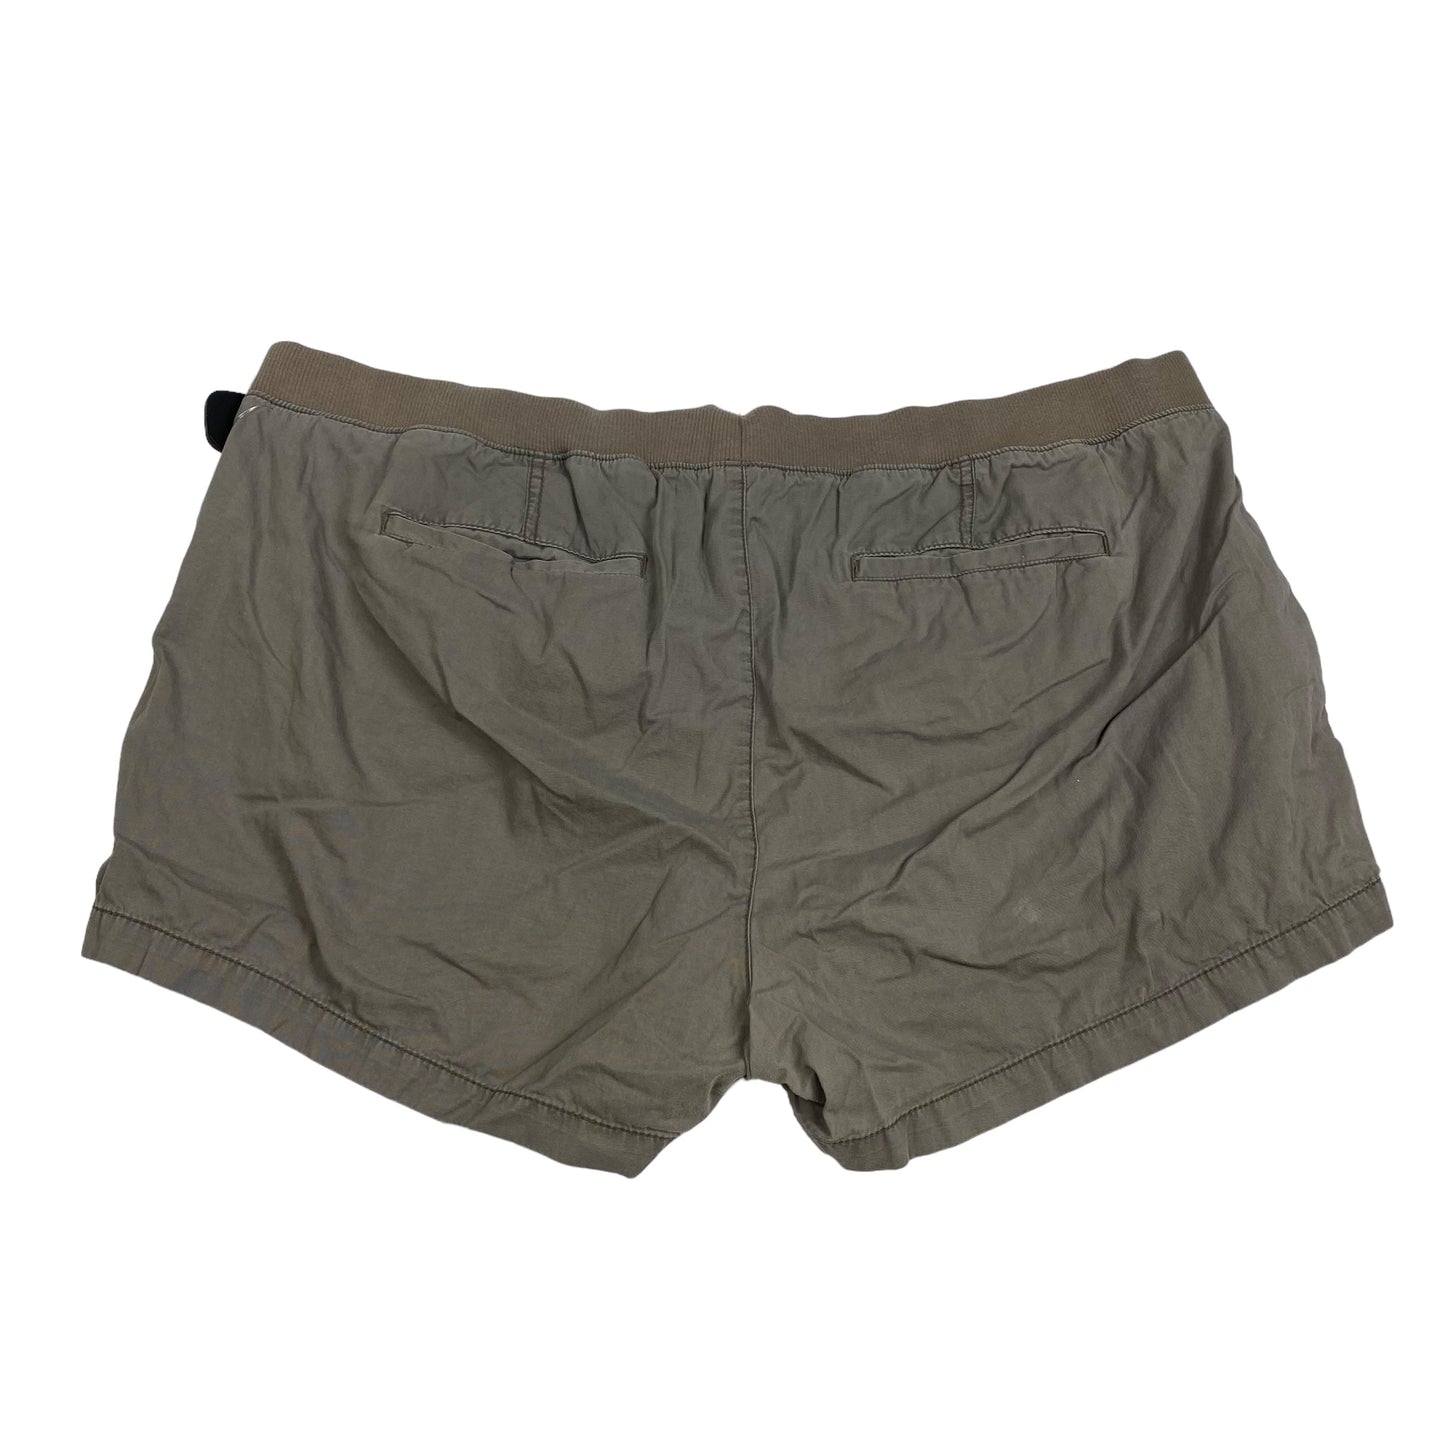 Brown Shorts Old Navy, Size Xxl